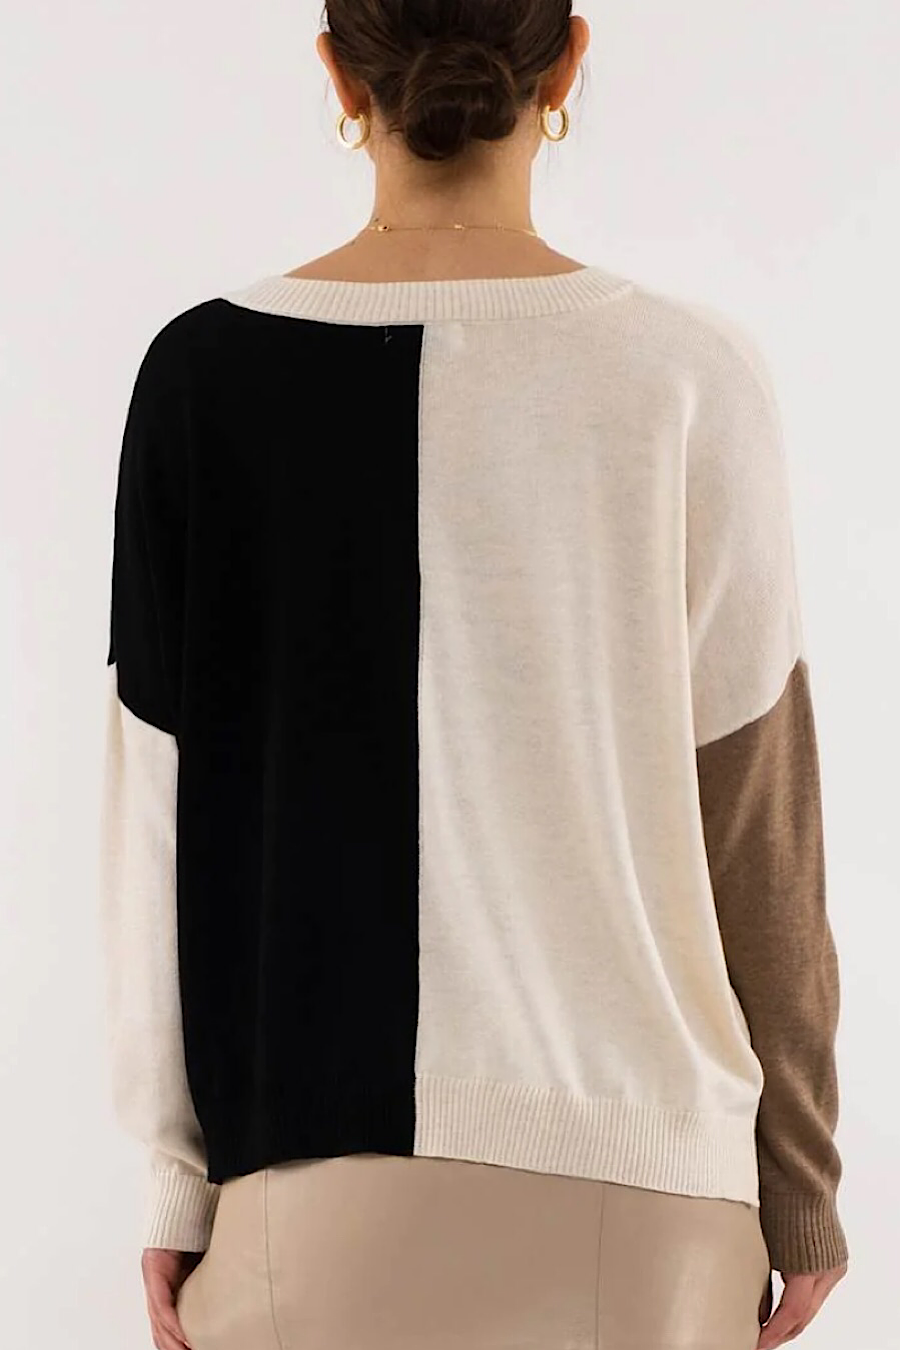 This or That Colorblock Top